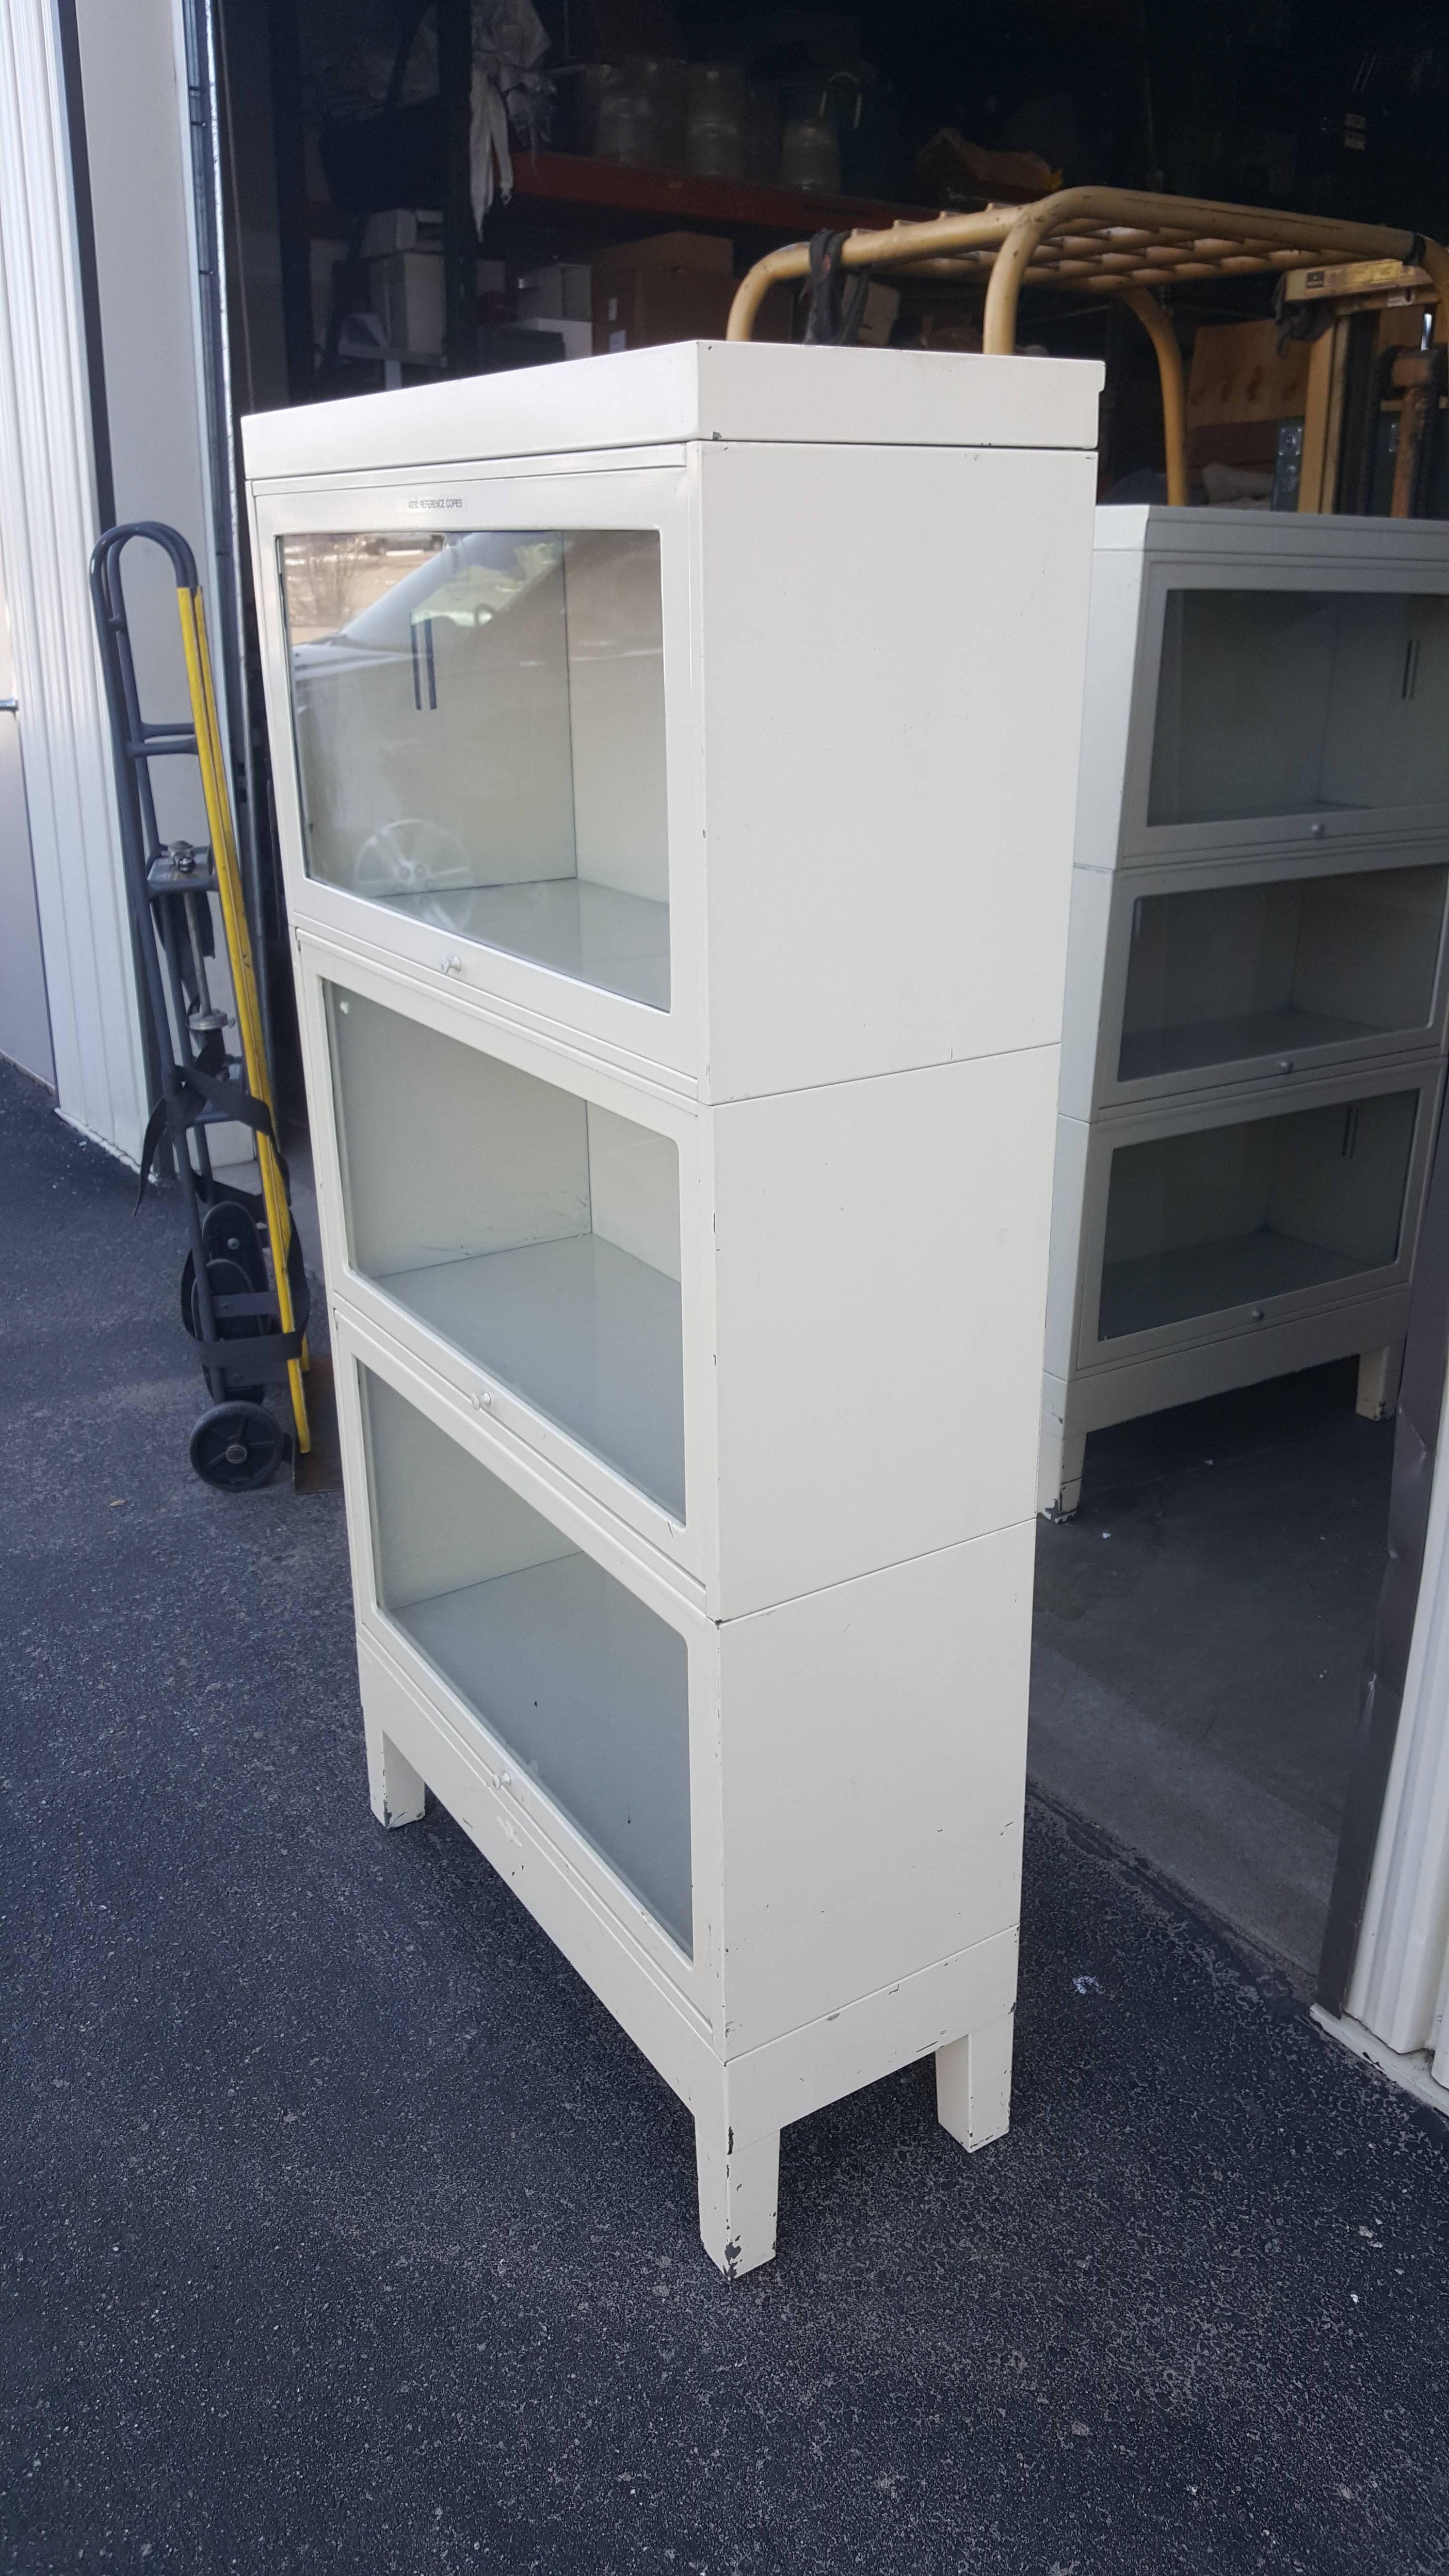 Barrister storage cabinet or bookshelf unit of painted ivory steel with glass fronts. Three stacking sections (and base), each with its own glass door front that slides up and under when open. Clean, sliding door fronts work perfectly. Usage: